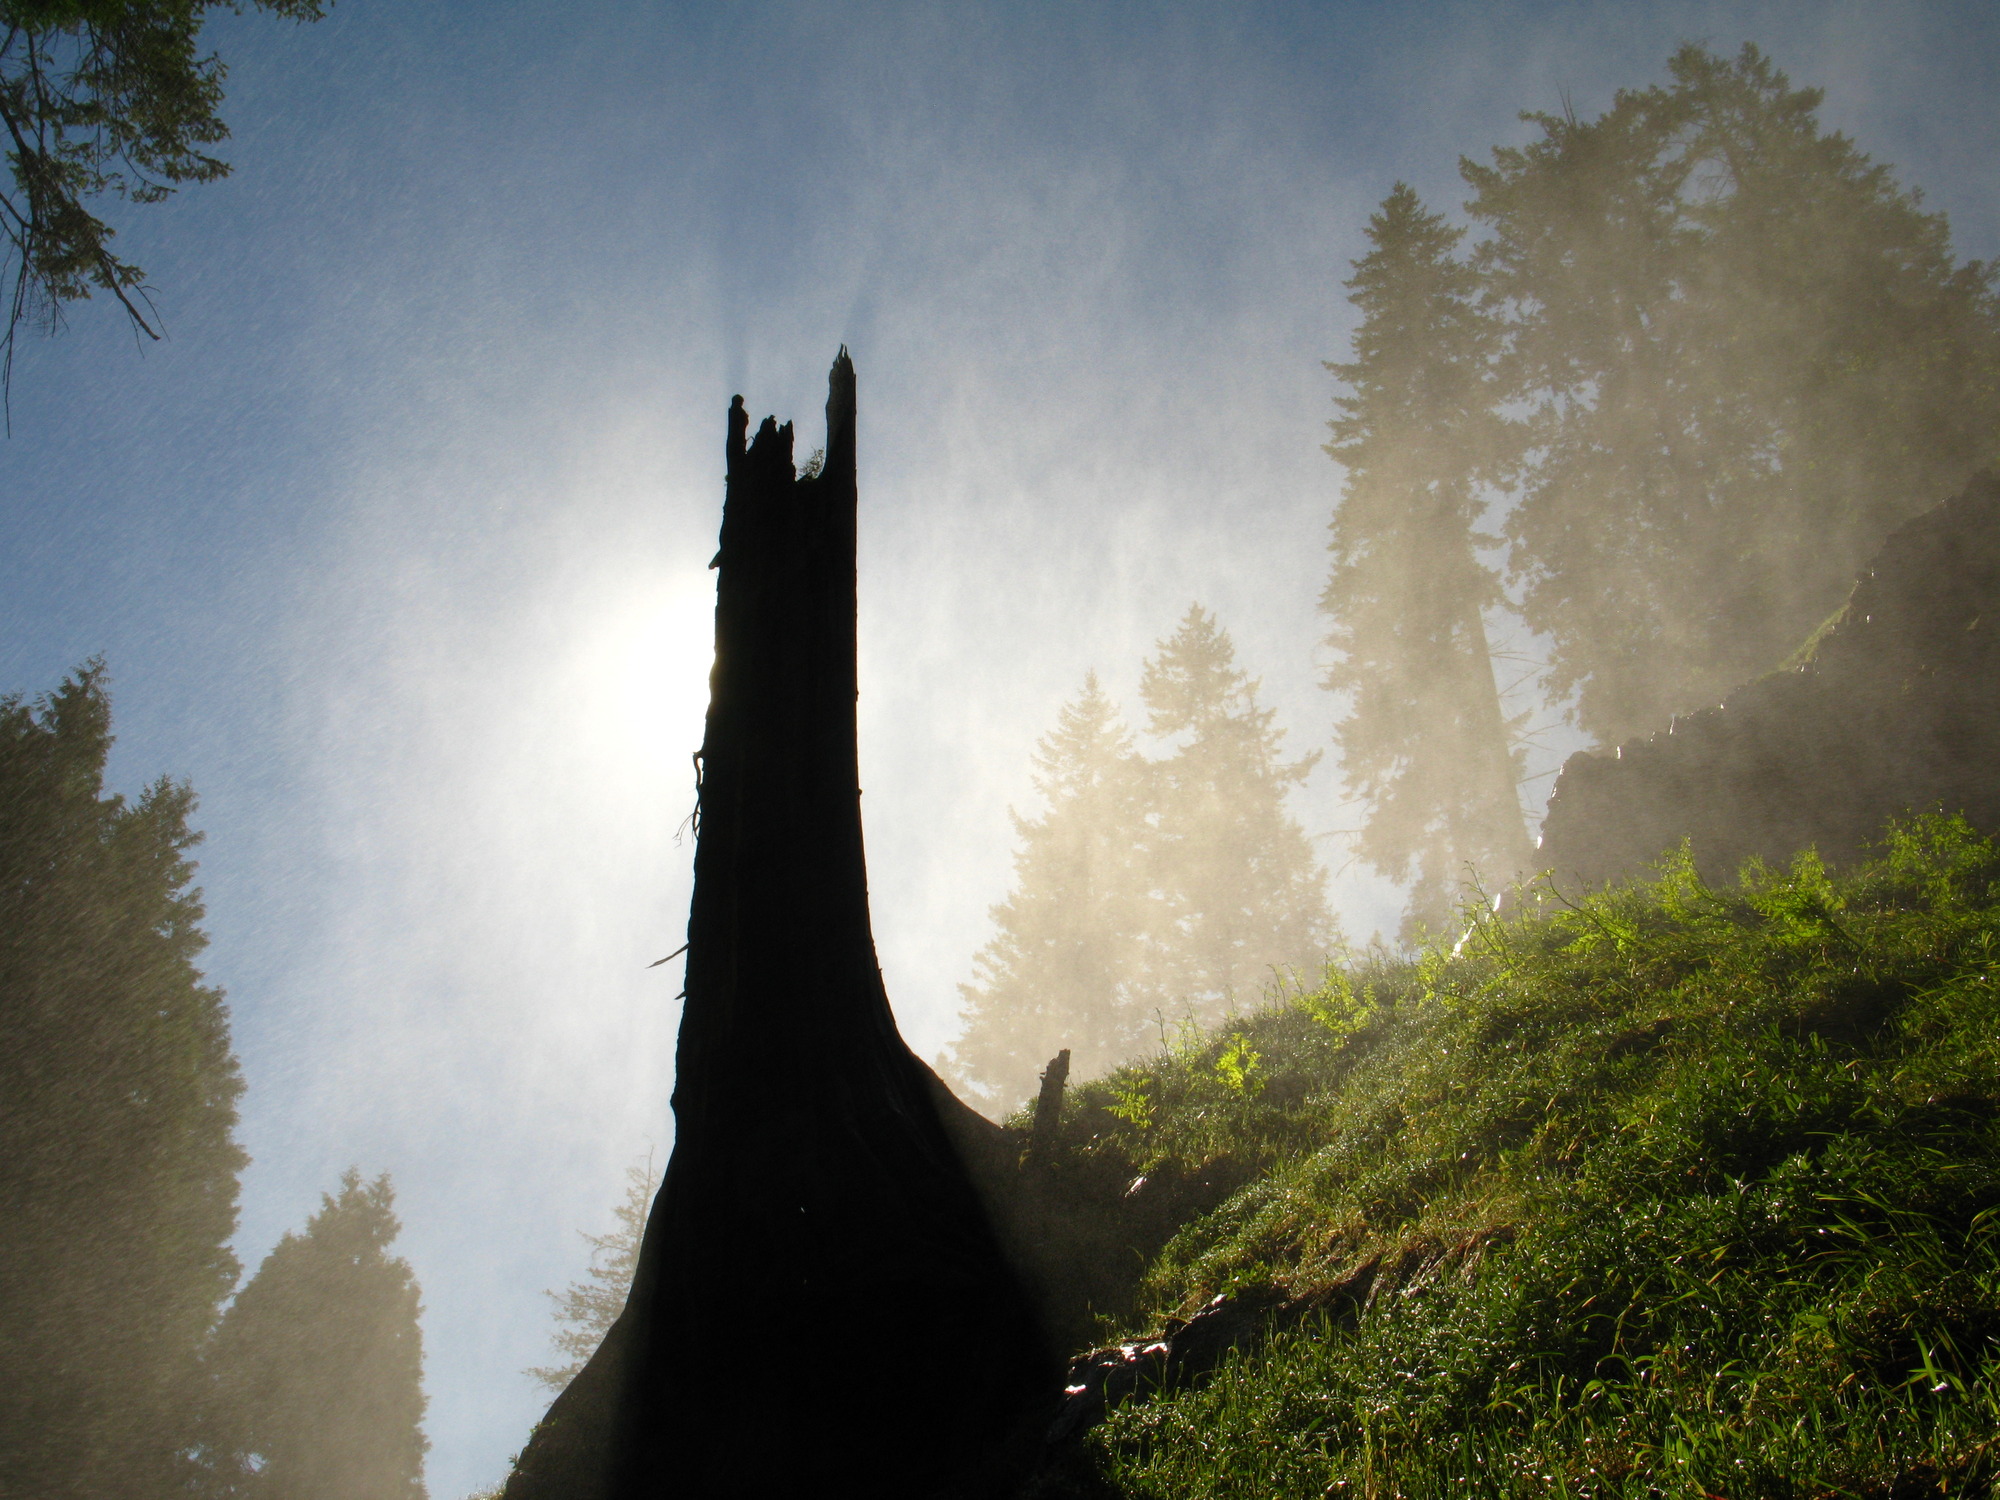 The tall snag of a stump is backlit by sun and mist.